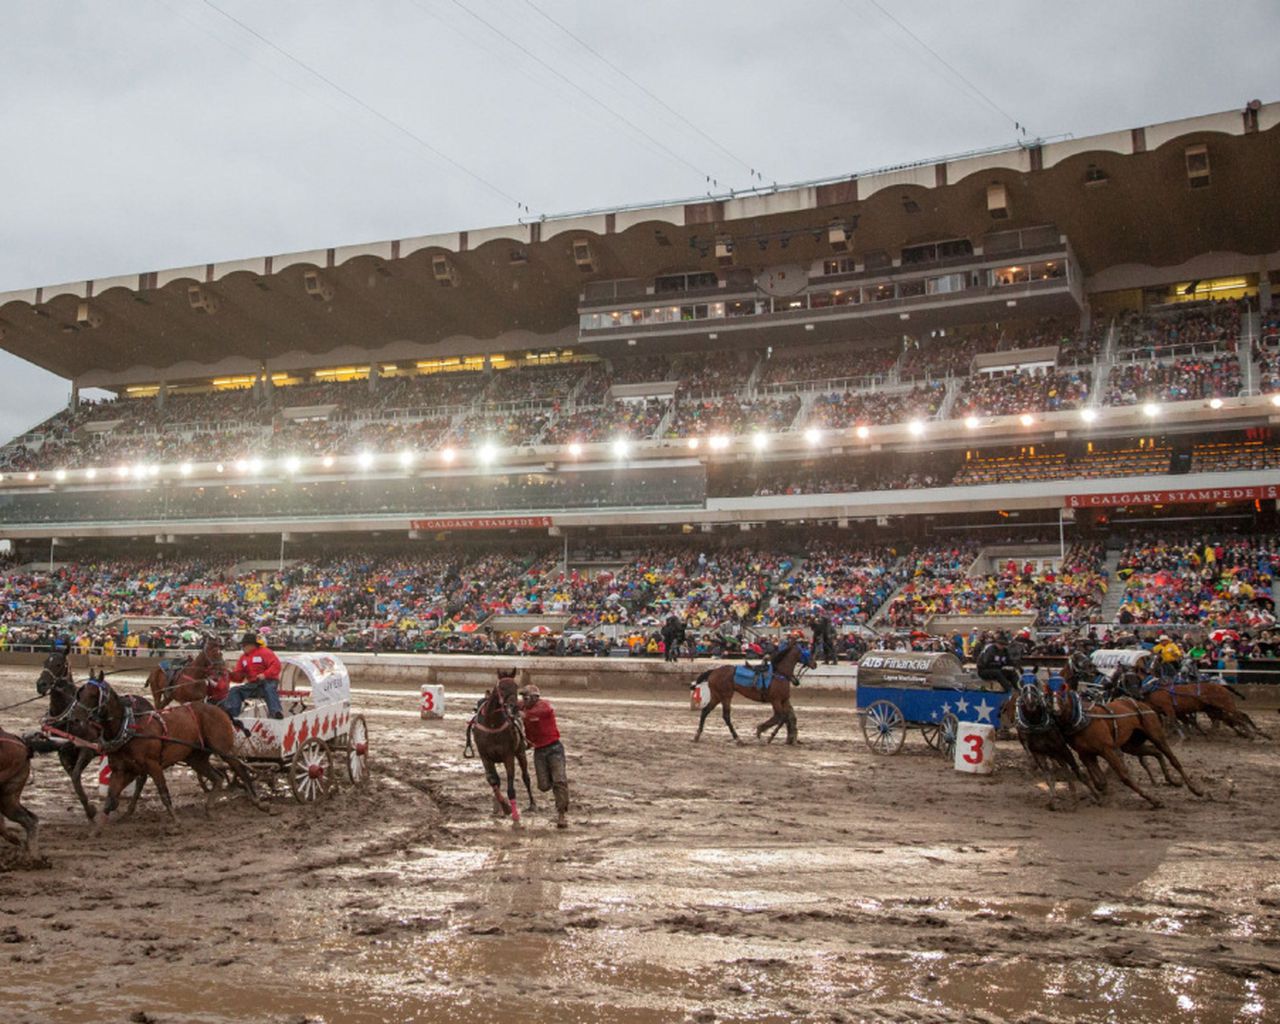 A guide to the 'chucks' at the Calgary Stampede